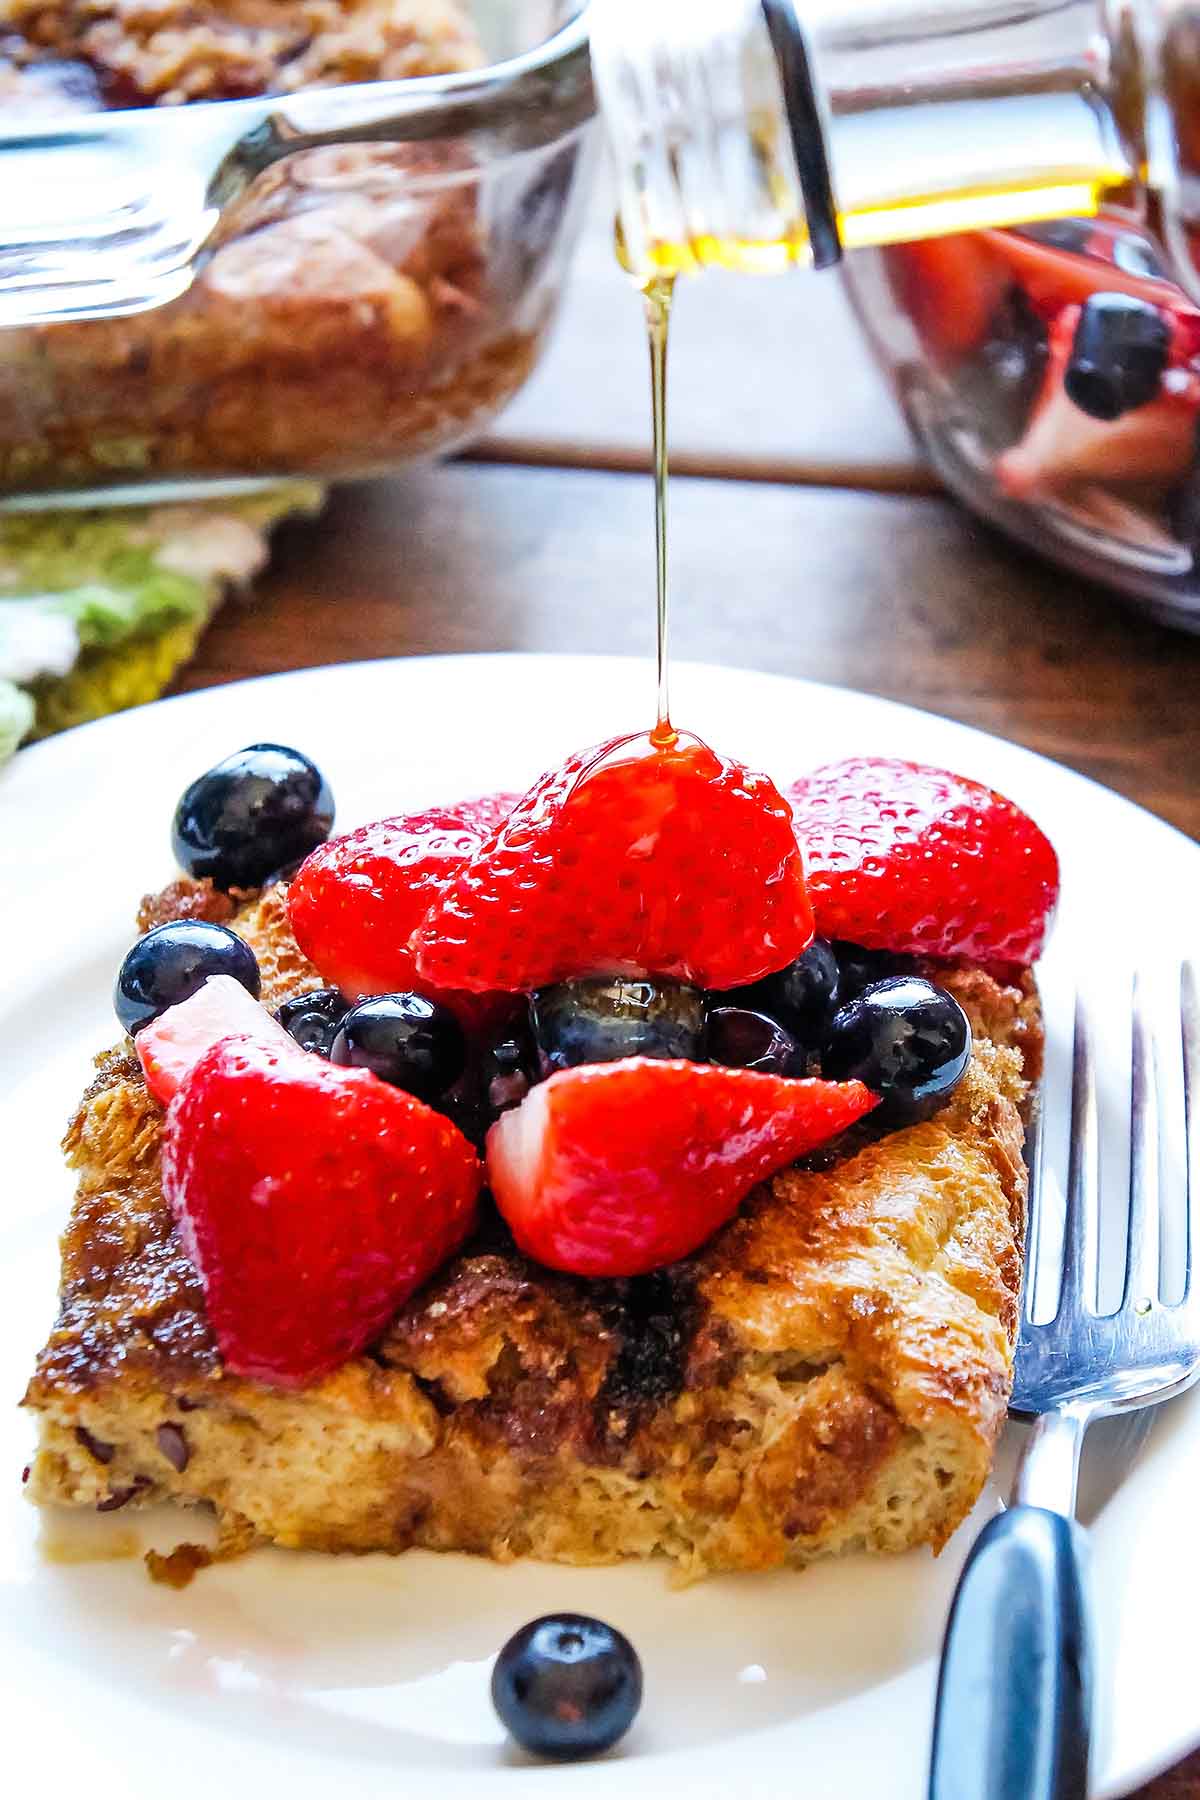 Bakes french toast serving drizzled with maple syrup